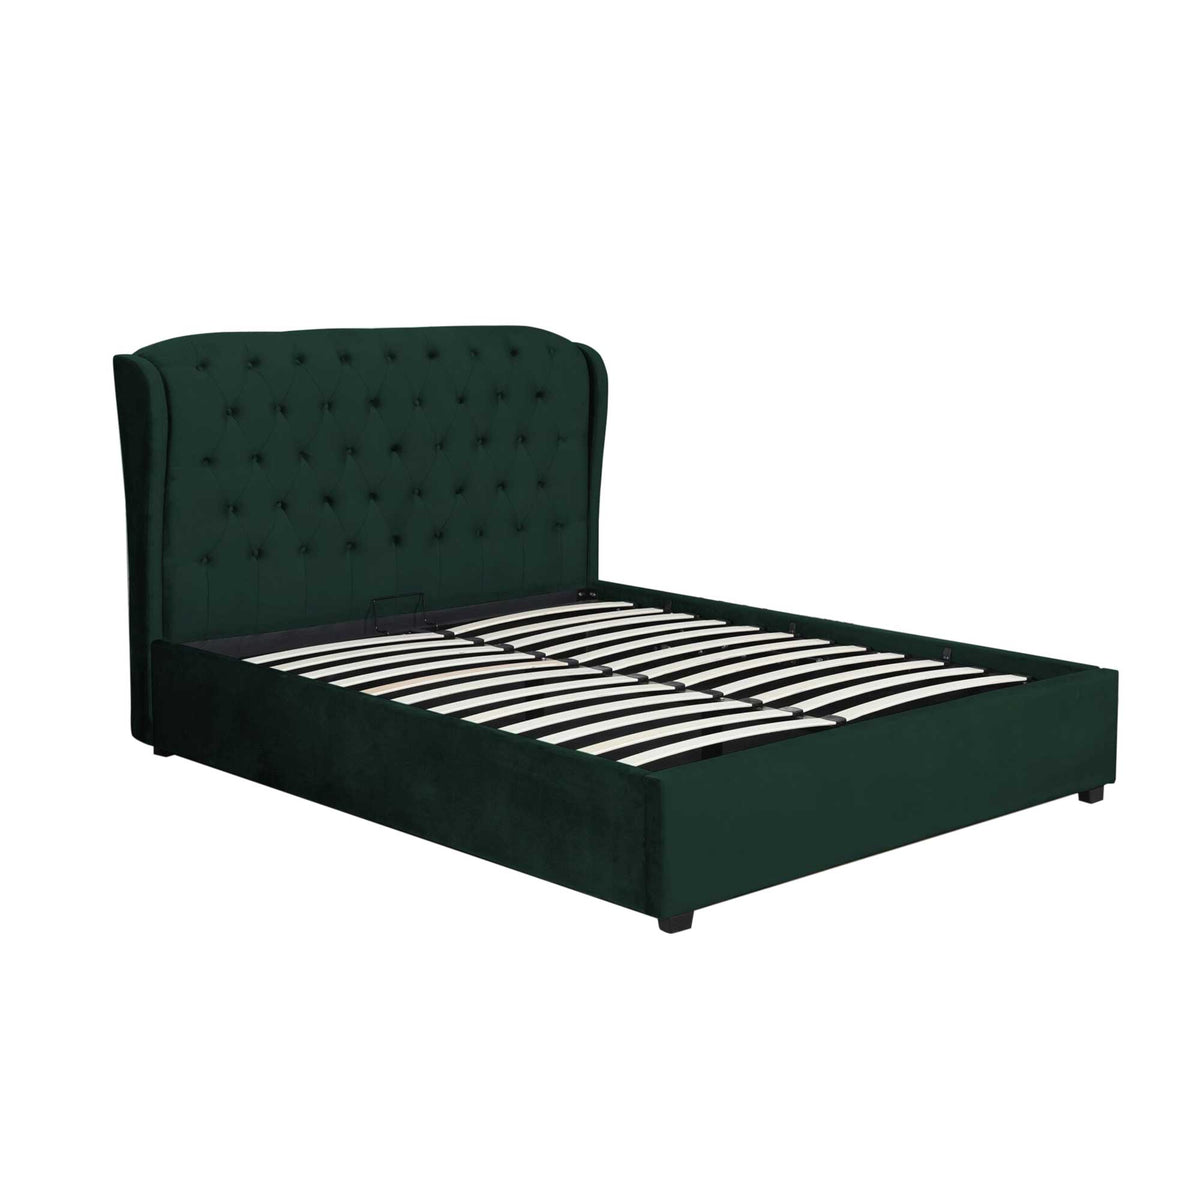 Aspen Bed Frame 5ft - 2 Colours Available